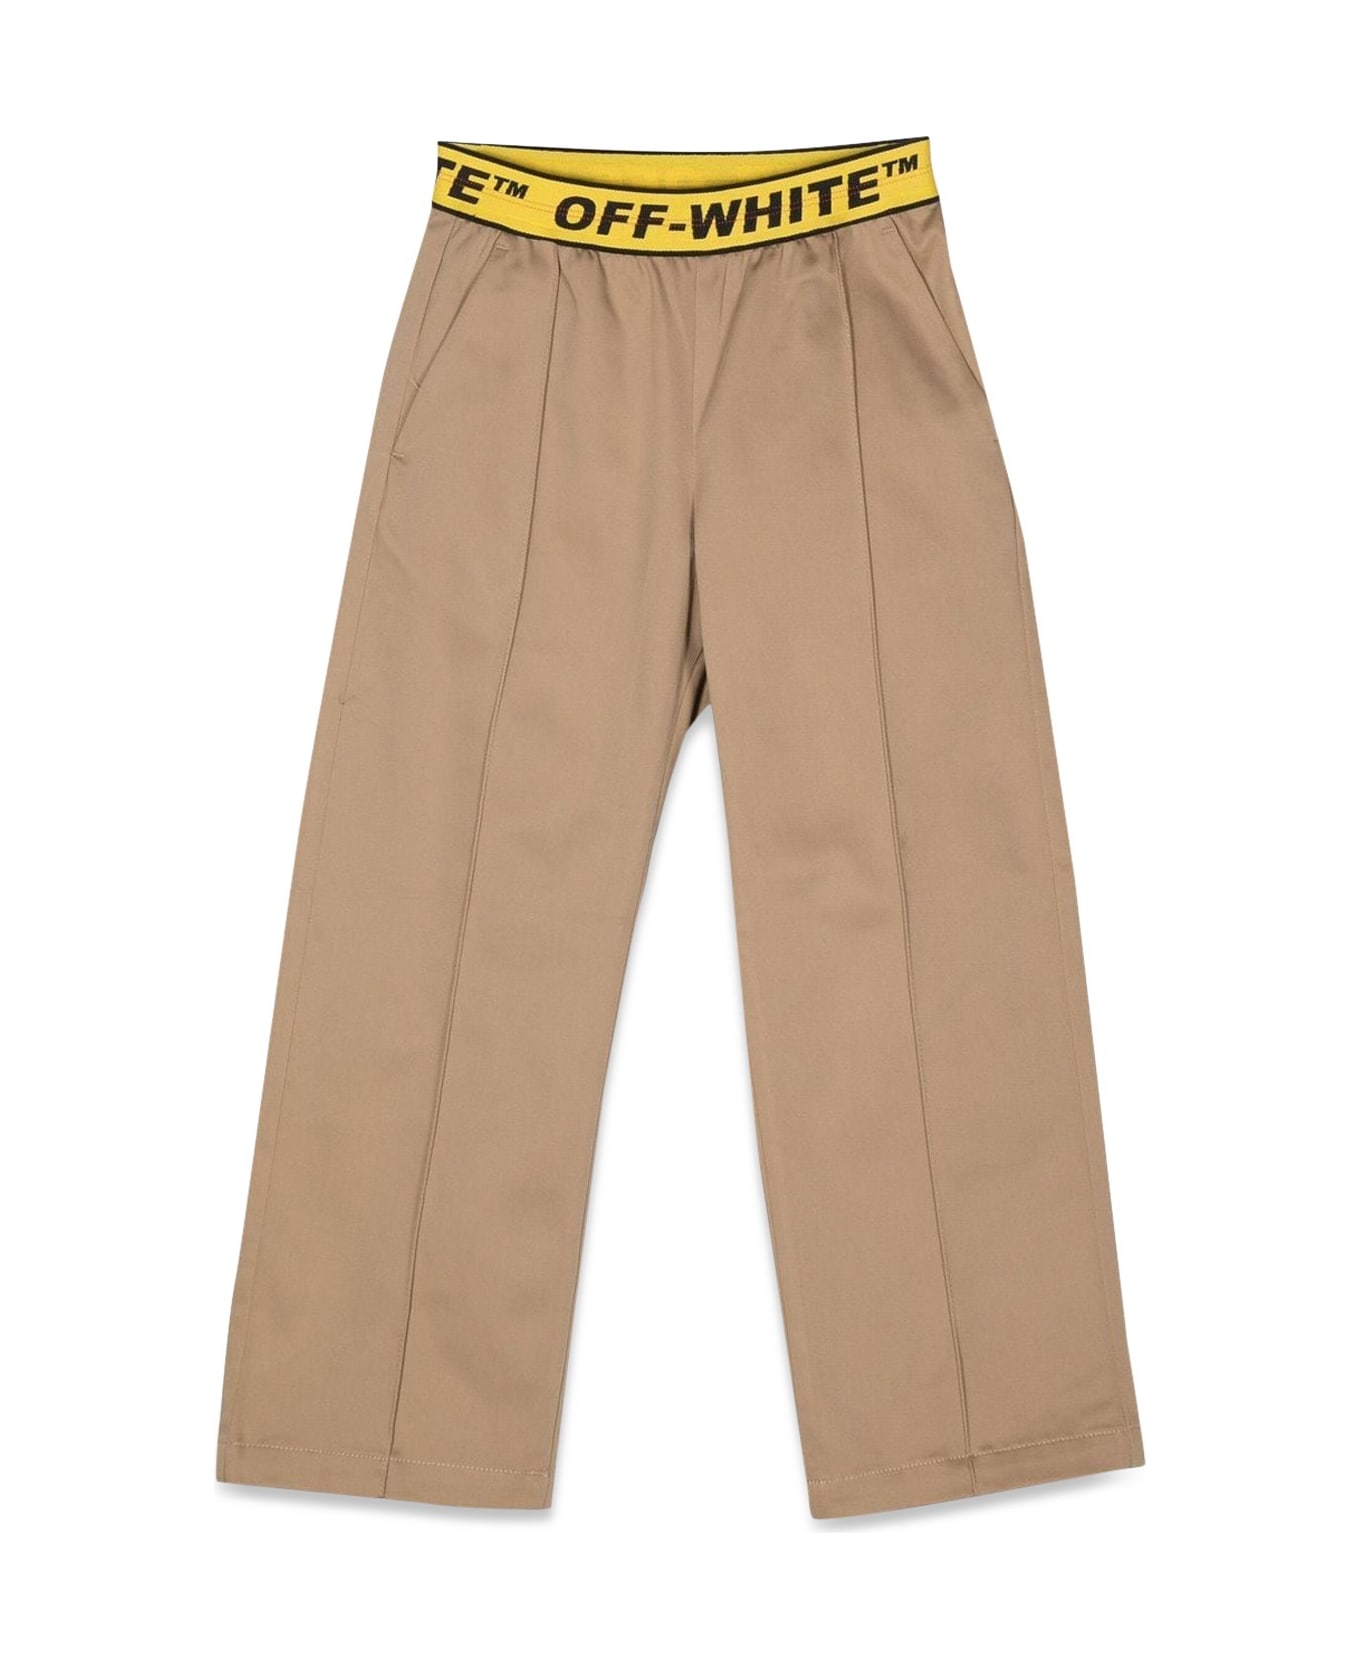 Off-White Industrial Chino Pant - BEIGE